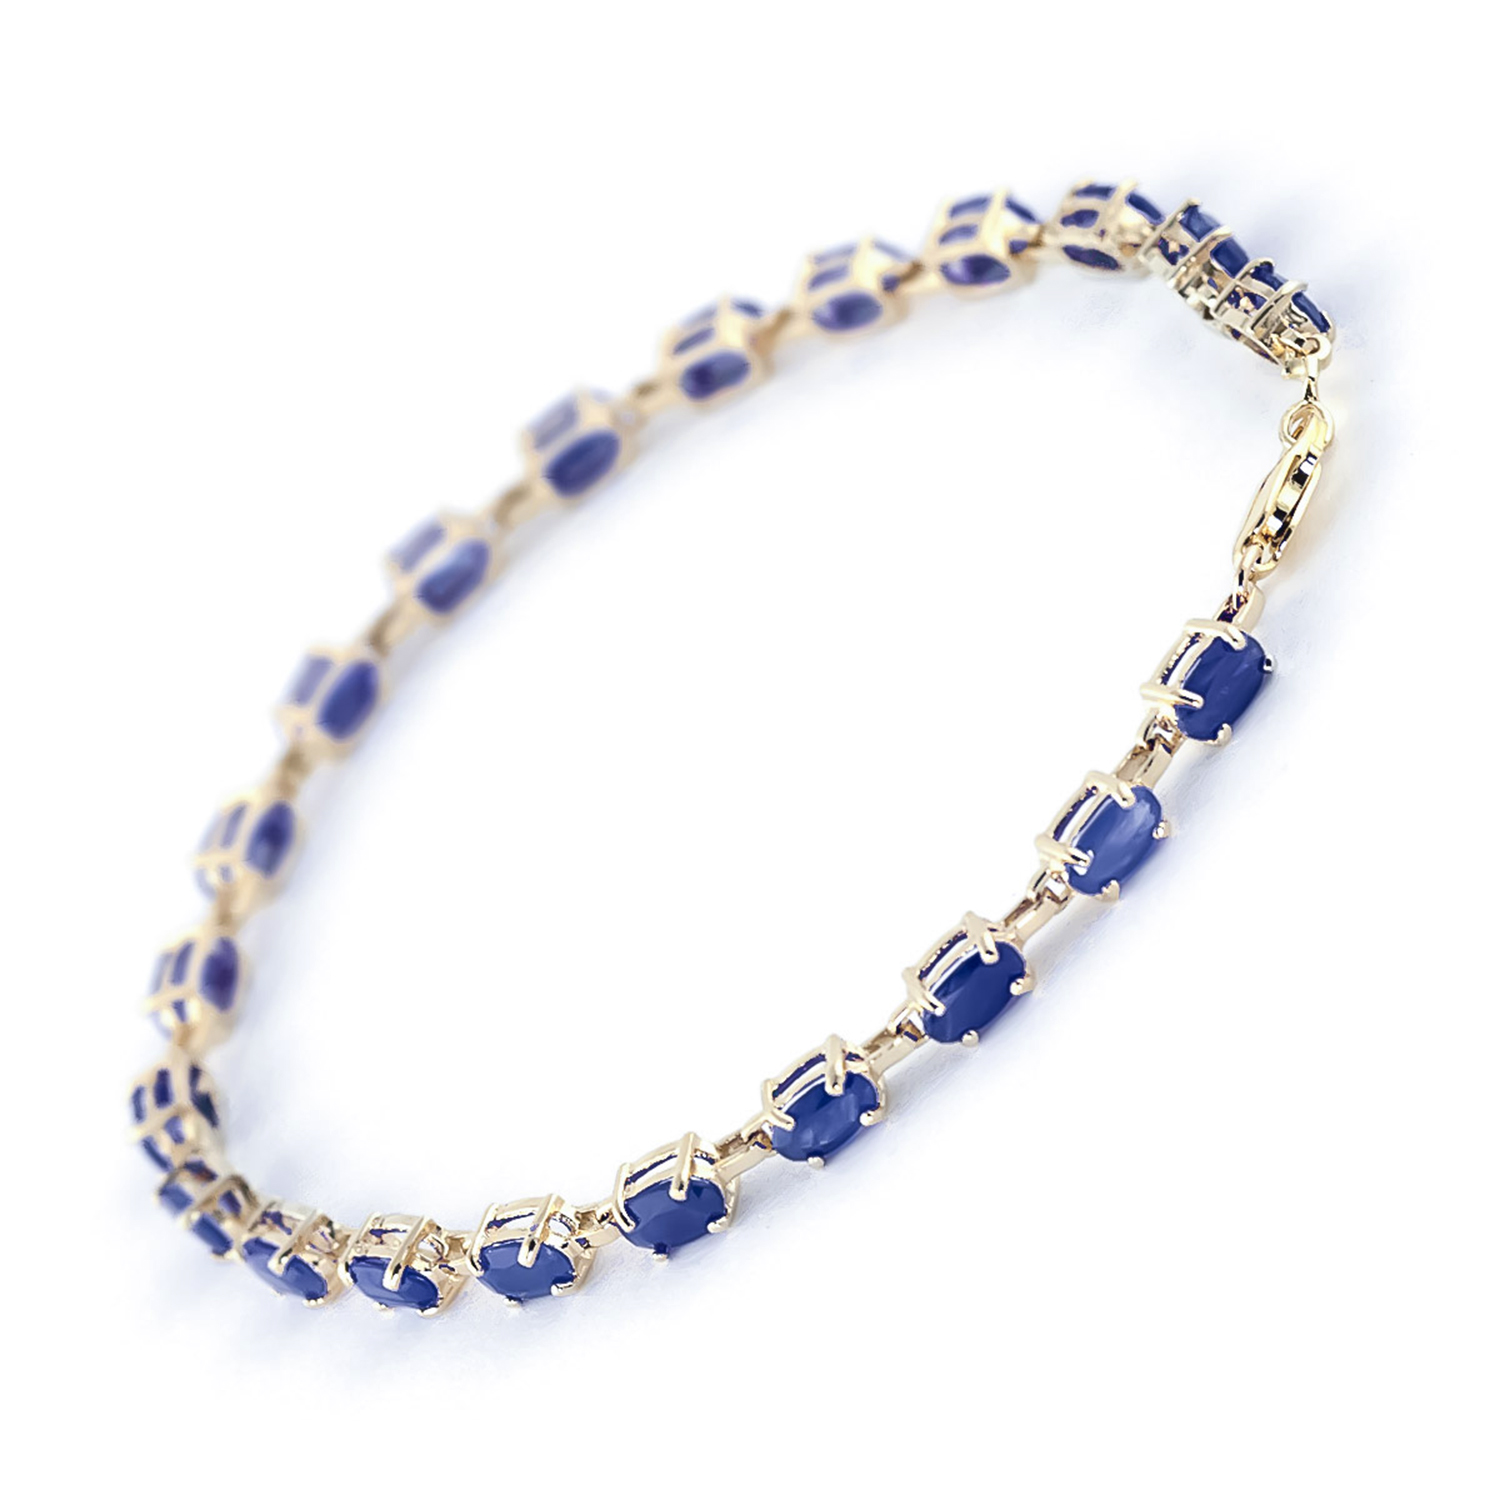 Galaxy Gold 8 Carat 14k Solid Gold Tennis Bracelet Natural Sapphire - image 2 of 3